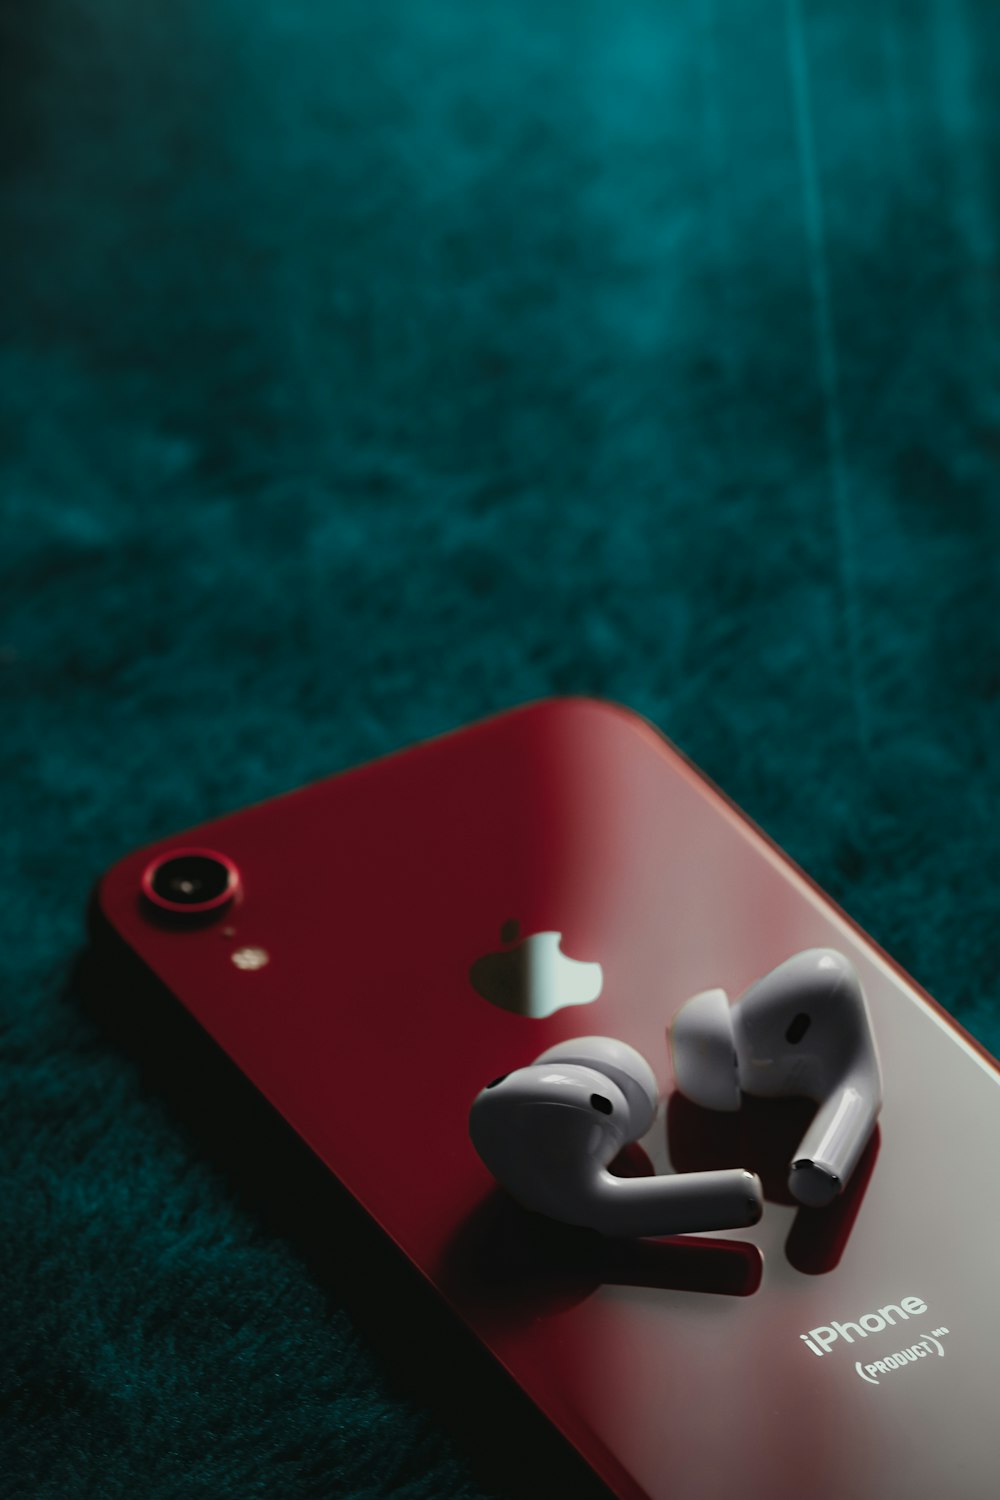 Iphone 11 Red Pictures Download Free Images On Unsplash